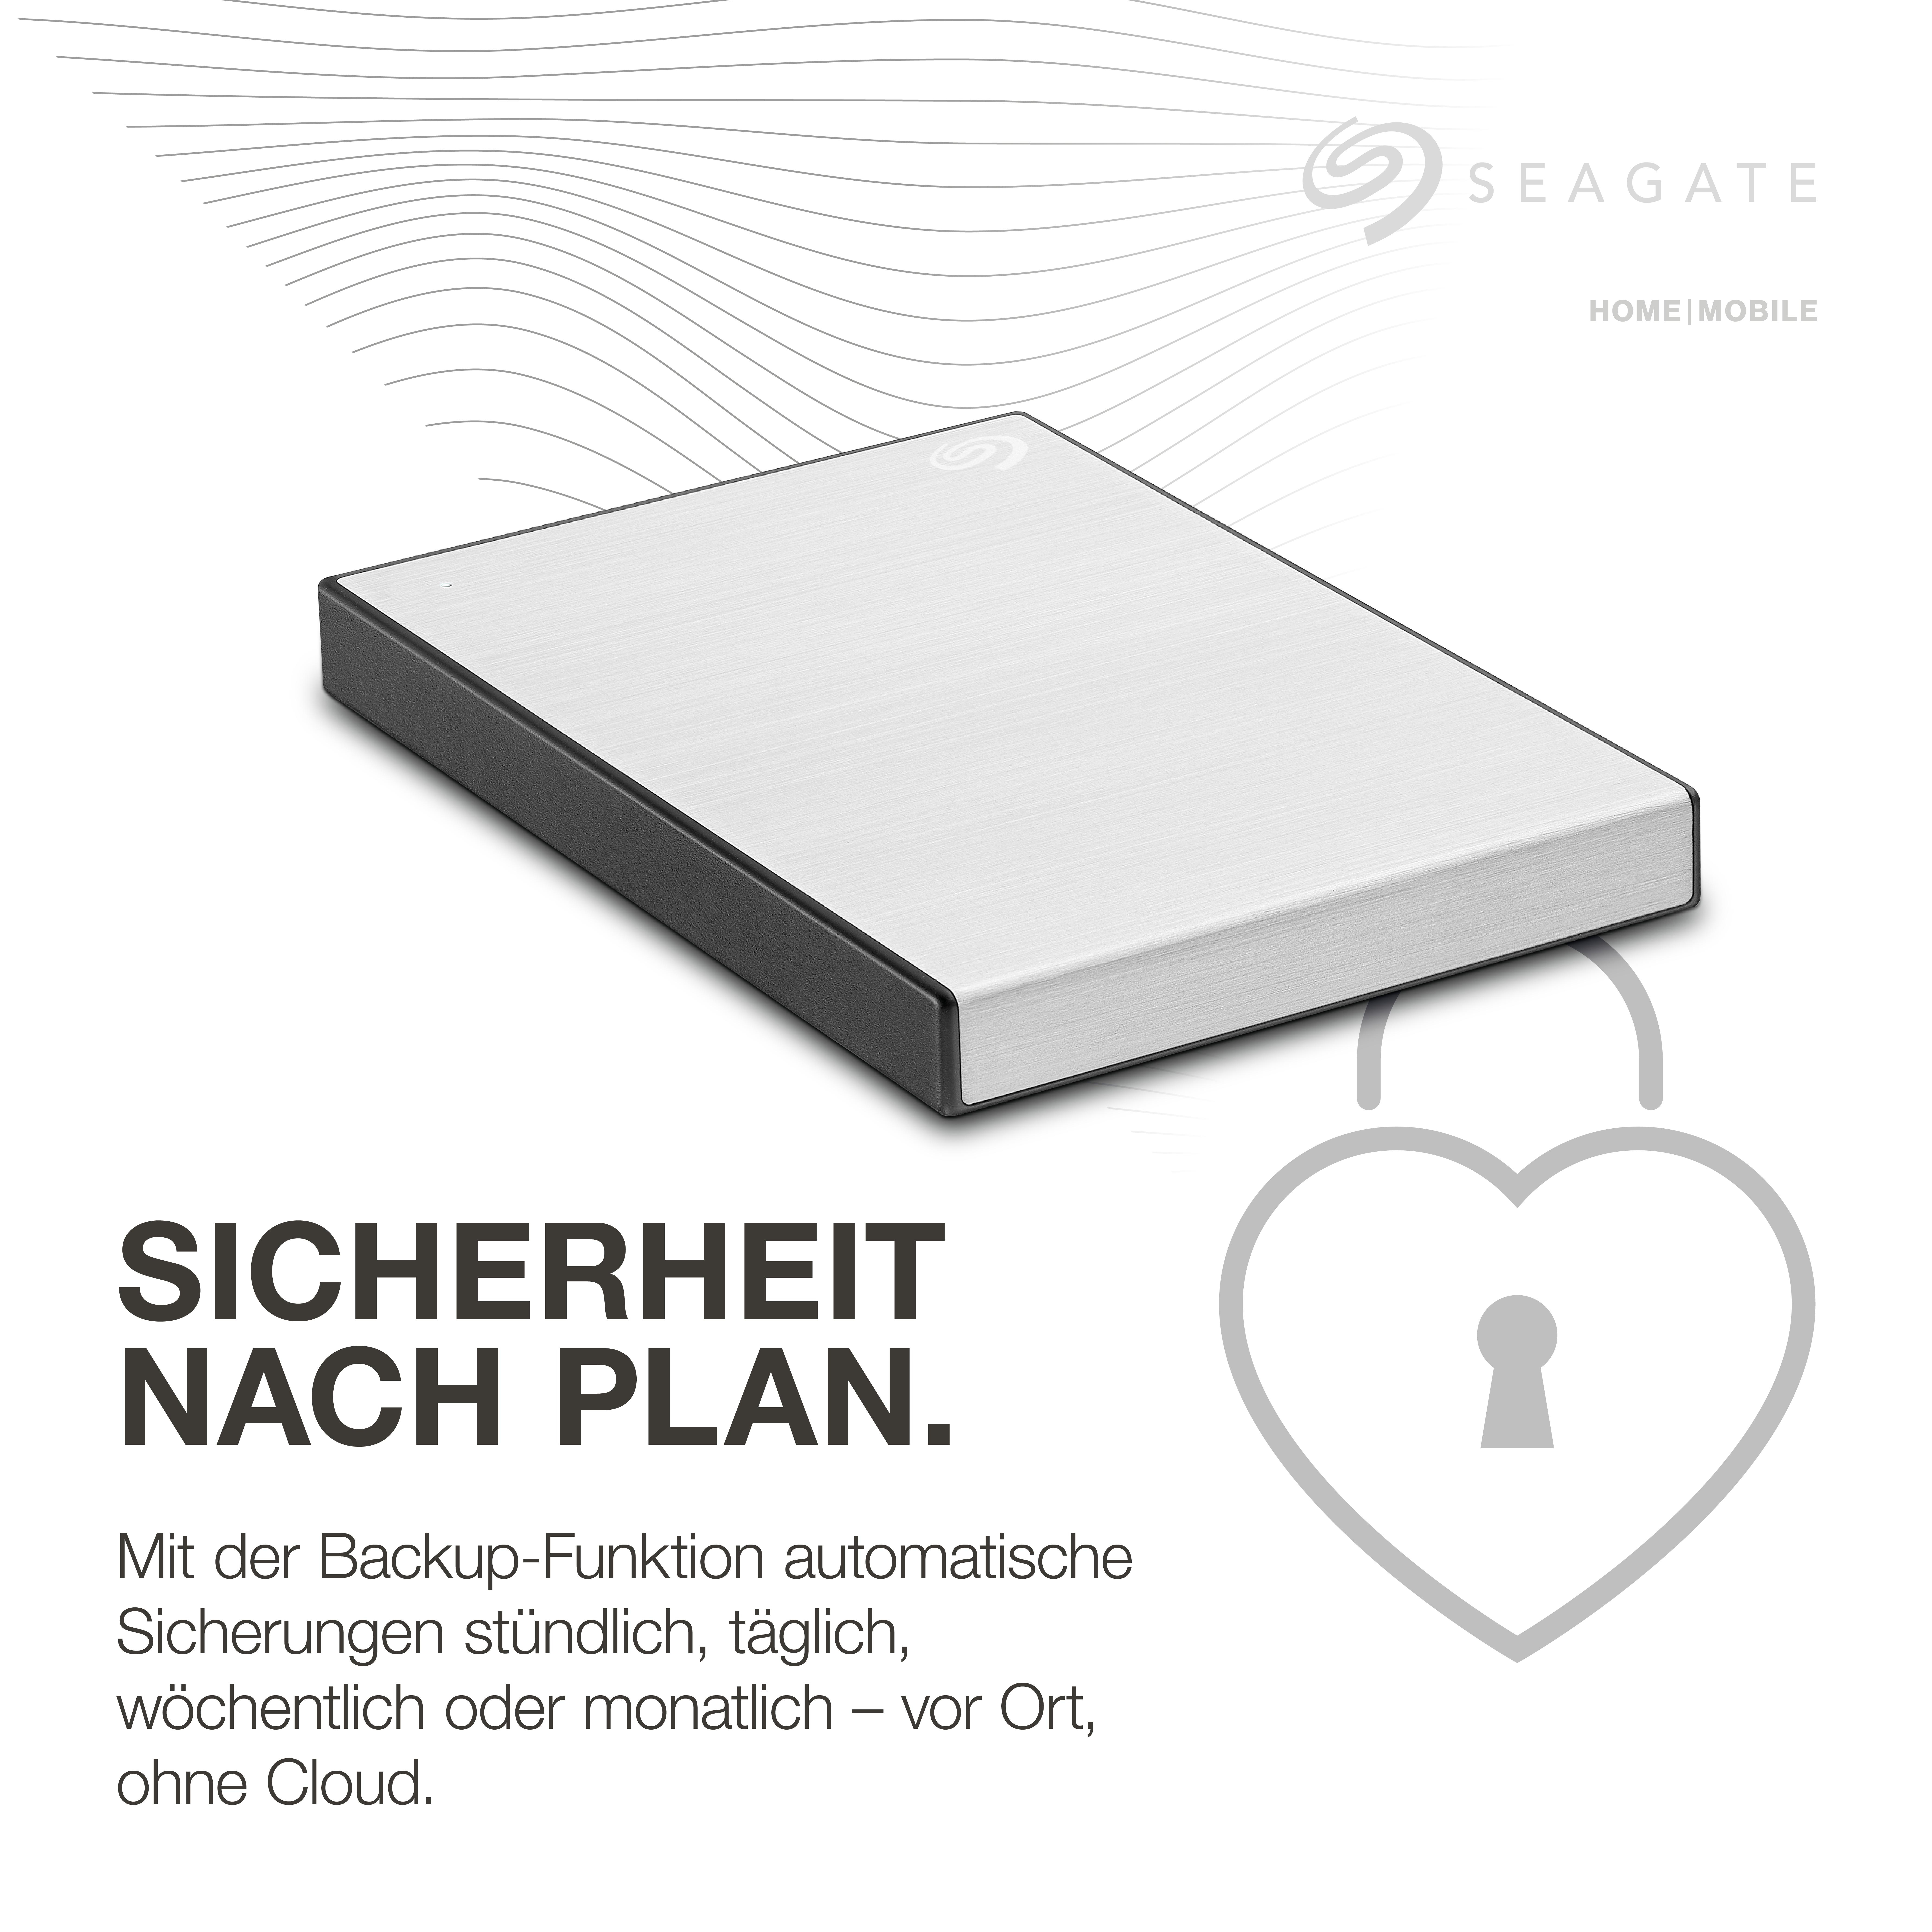 SEAGATE One Touch mobile Festplatte, 1 TB 2,5 HDD, Zoll, extern, Silber